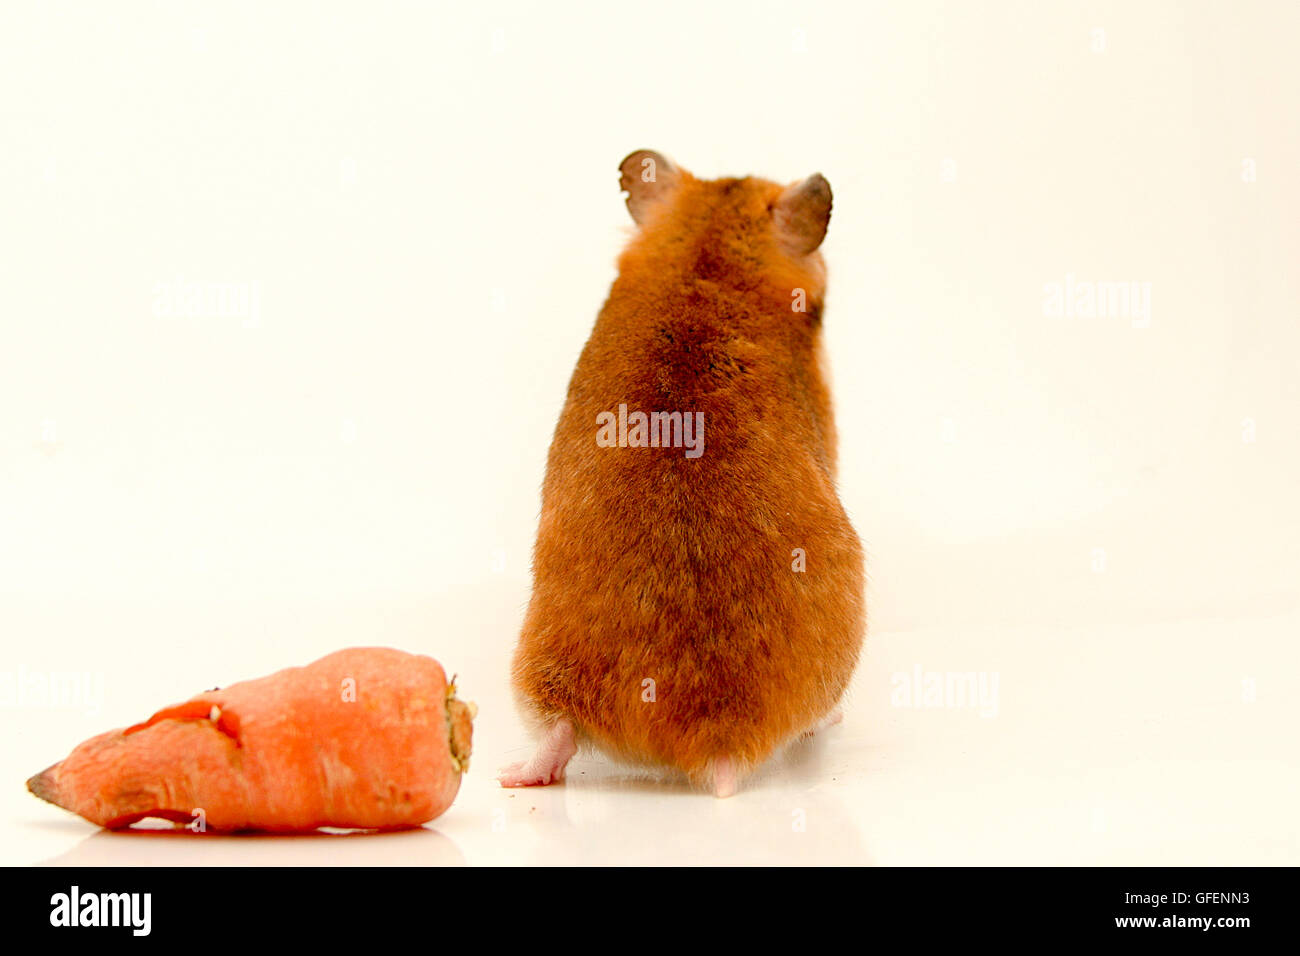 Cutout of a curious hamster with back to camera and a carrot on white background Stock Photo